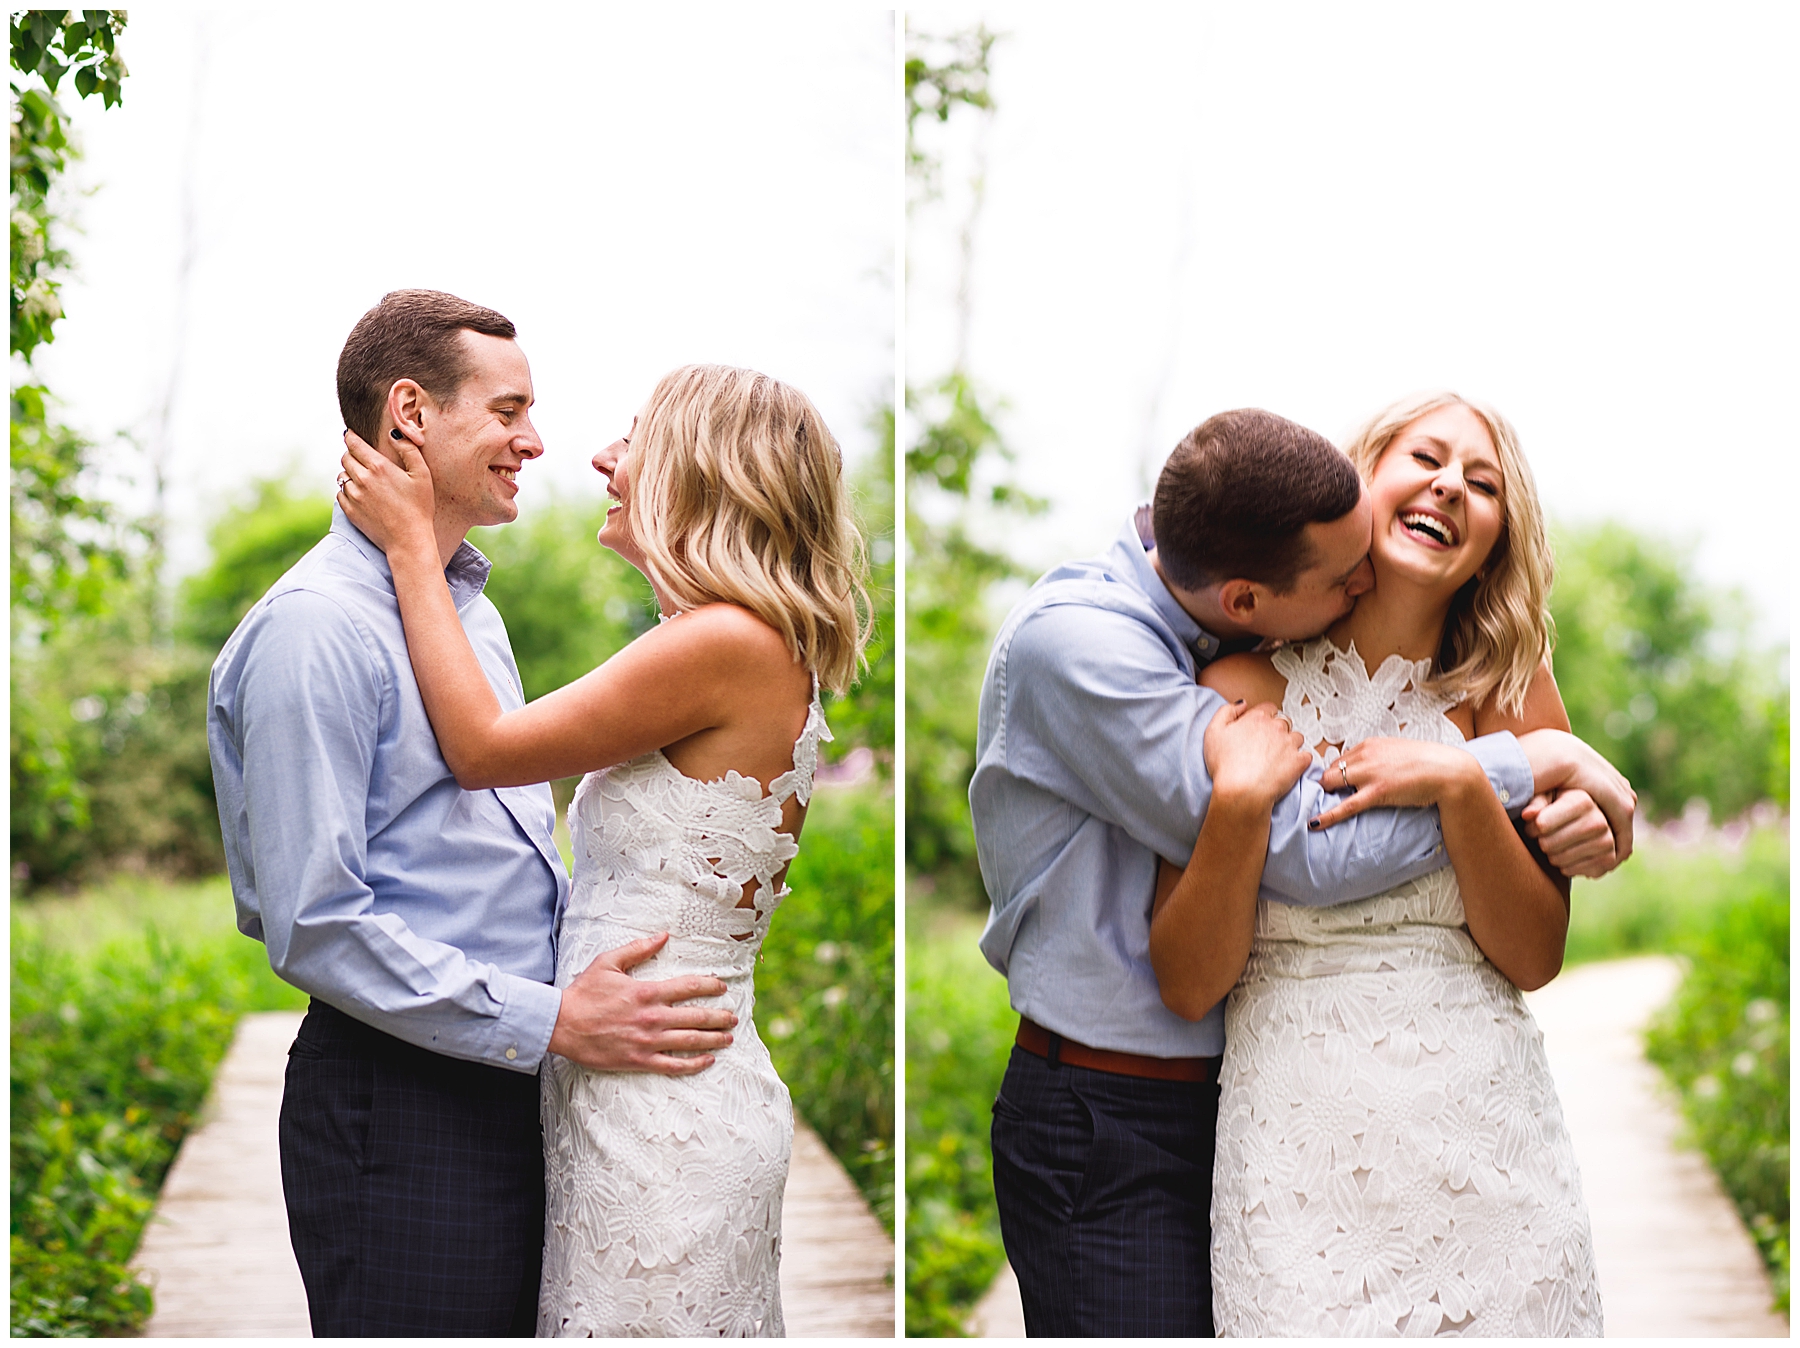  White dress engagement session in the park - Chelsea Matson Photography 